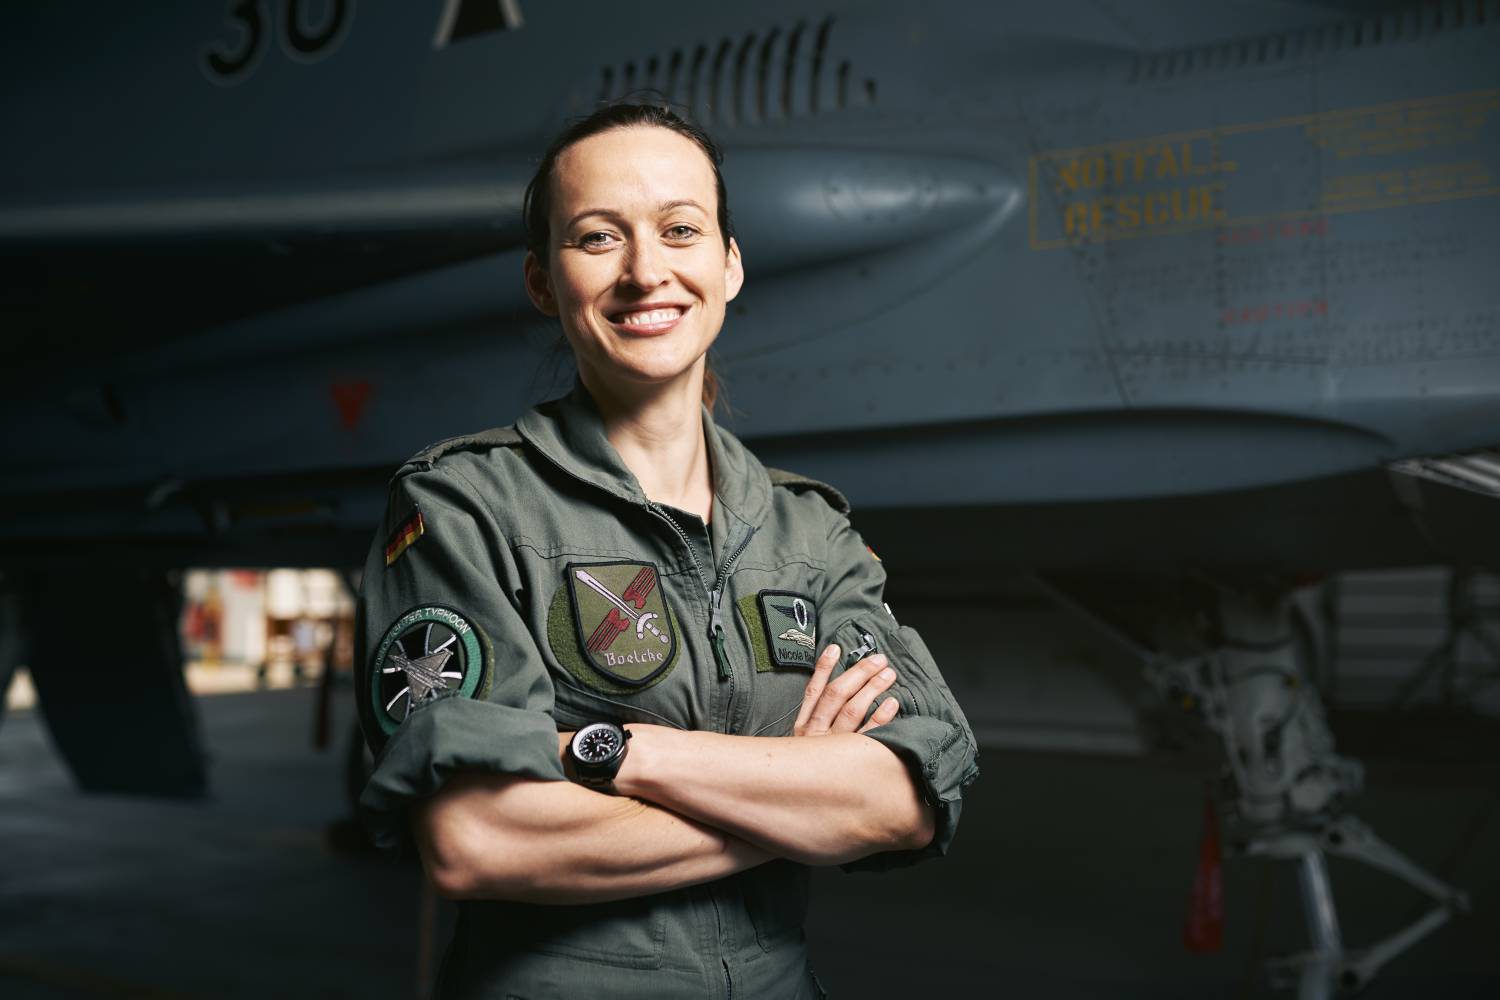 Nicola Winter, pilot, engineer and university lecturer for emergency and crisis management.